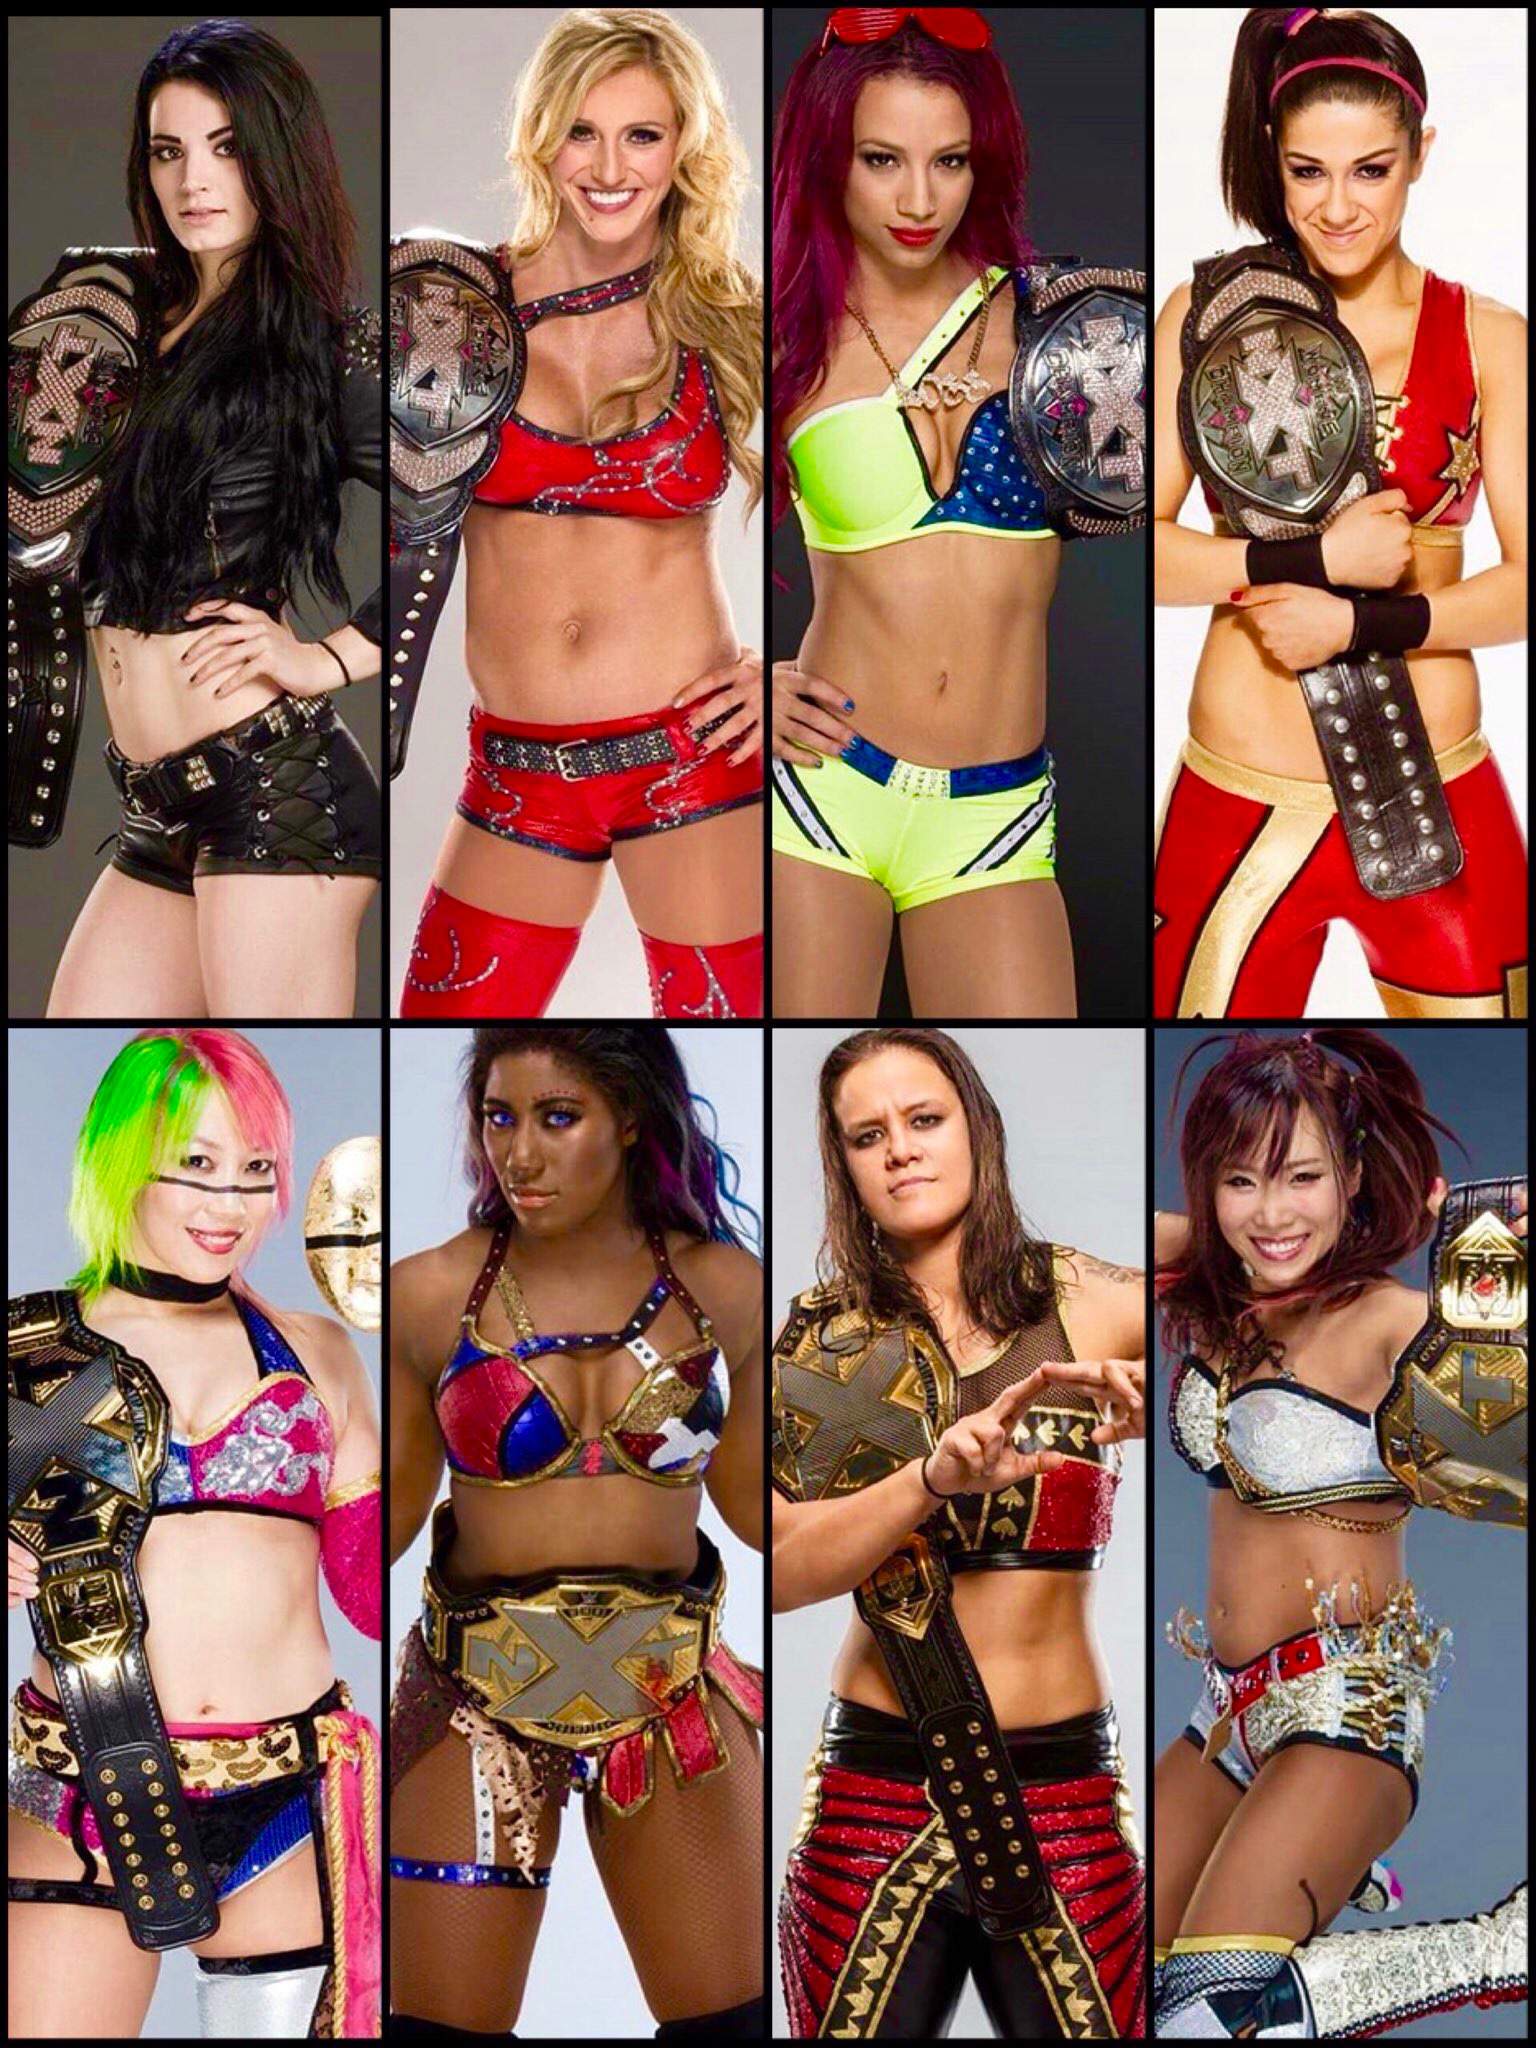 Who is your favorite NXT Women’s Champion? Wrestling Amino